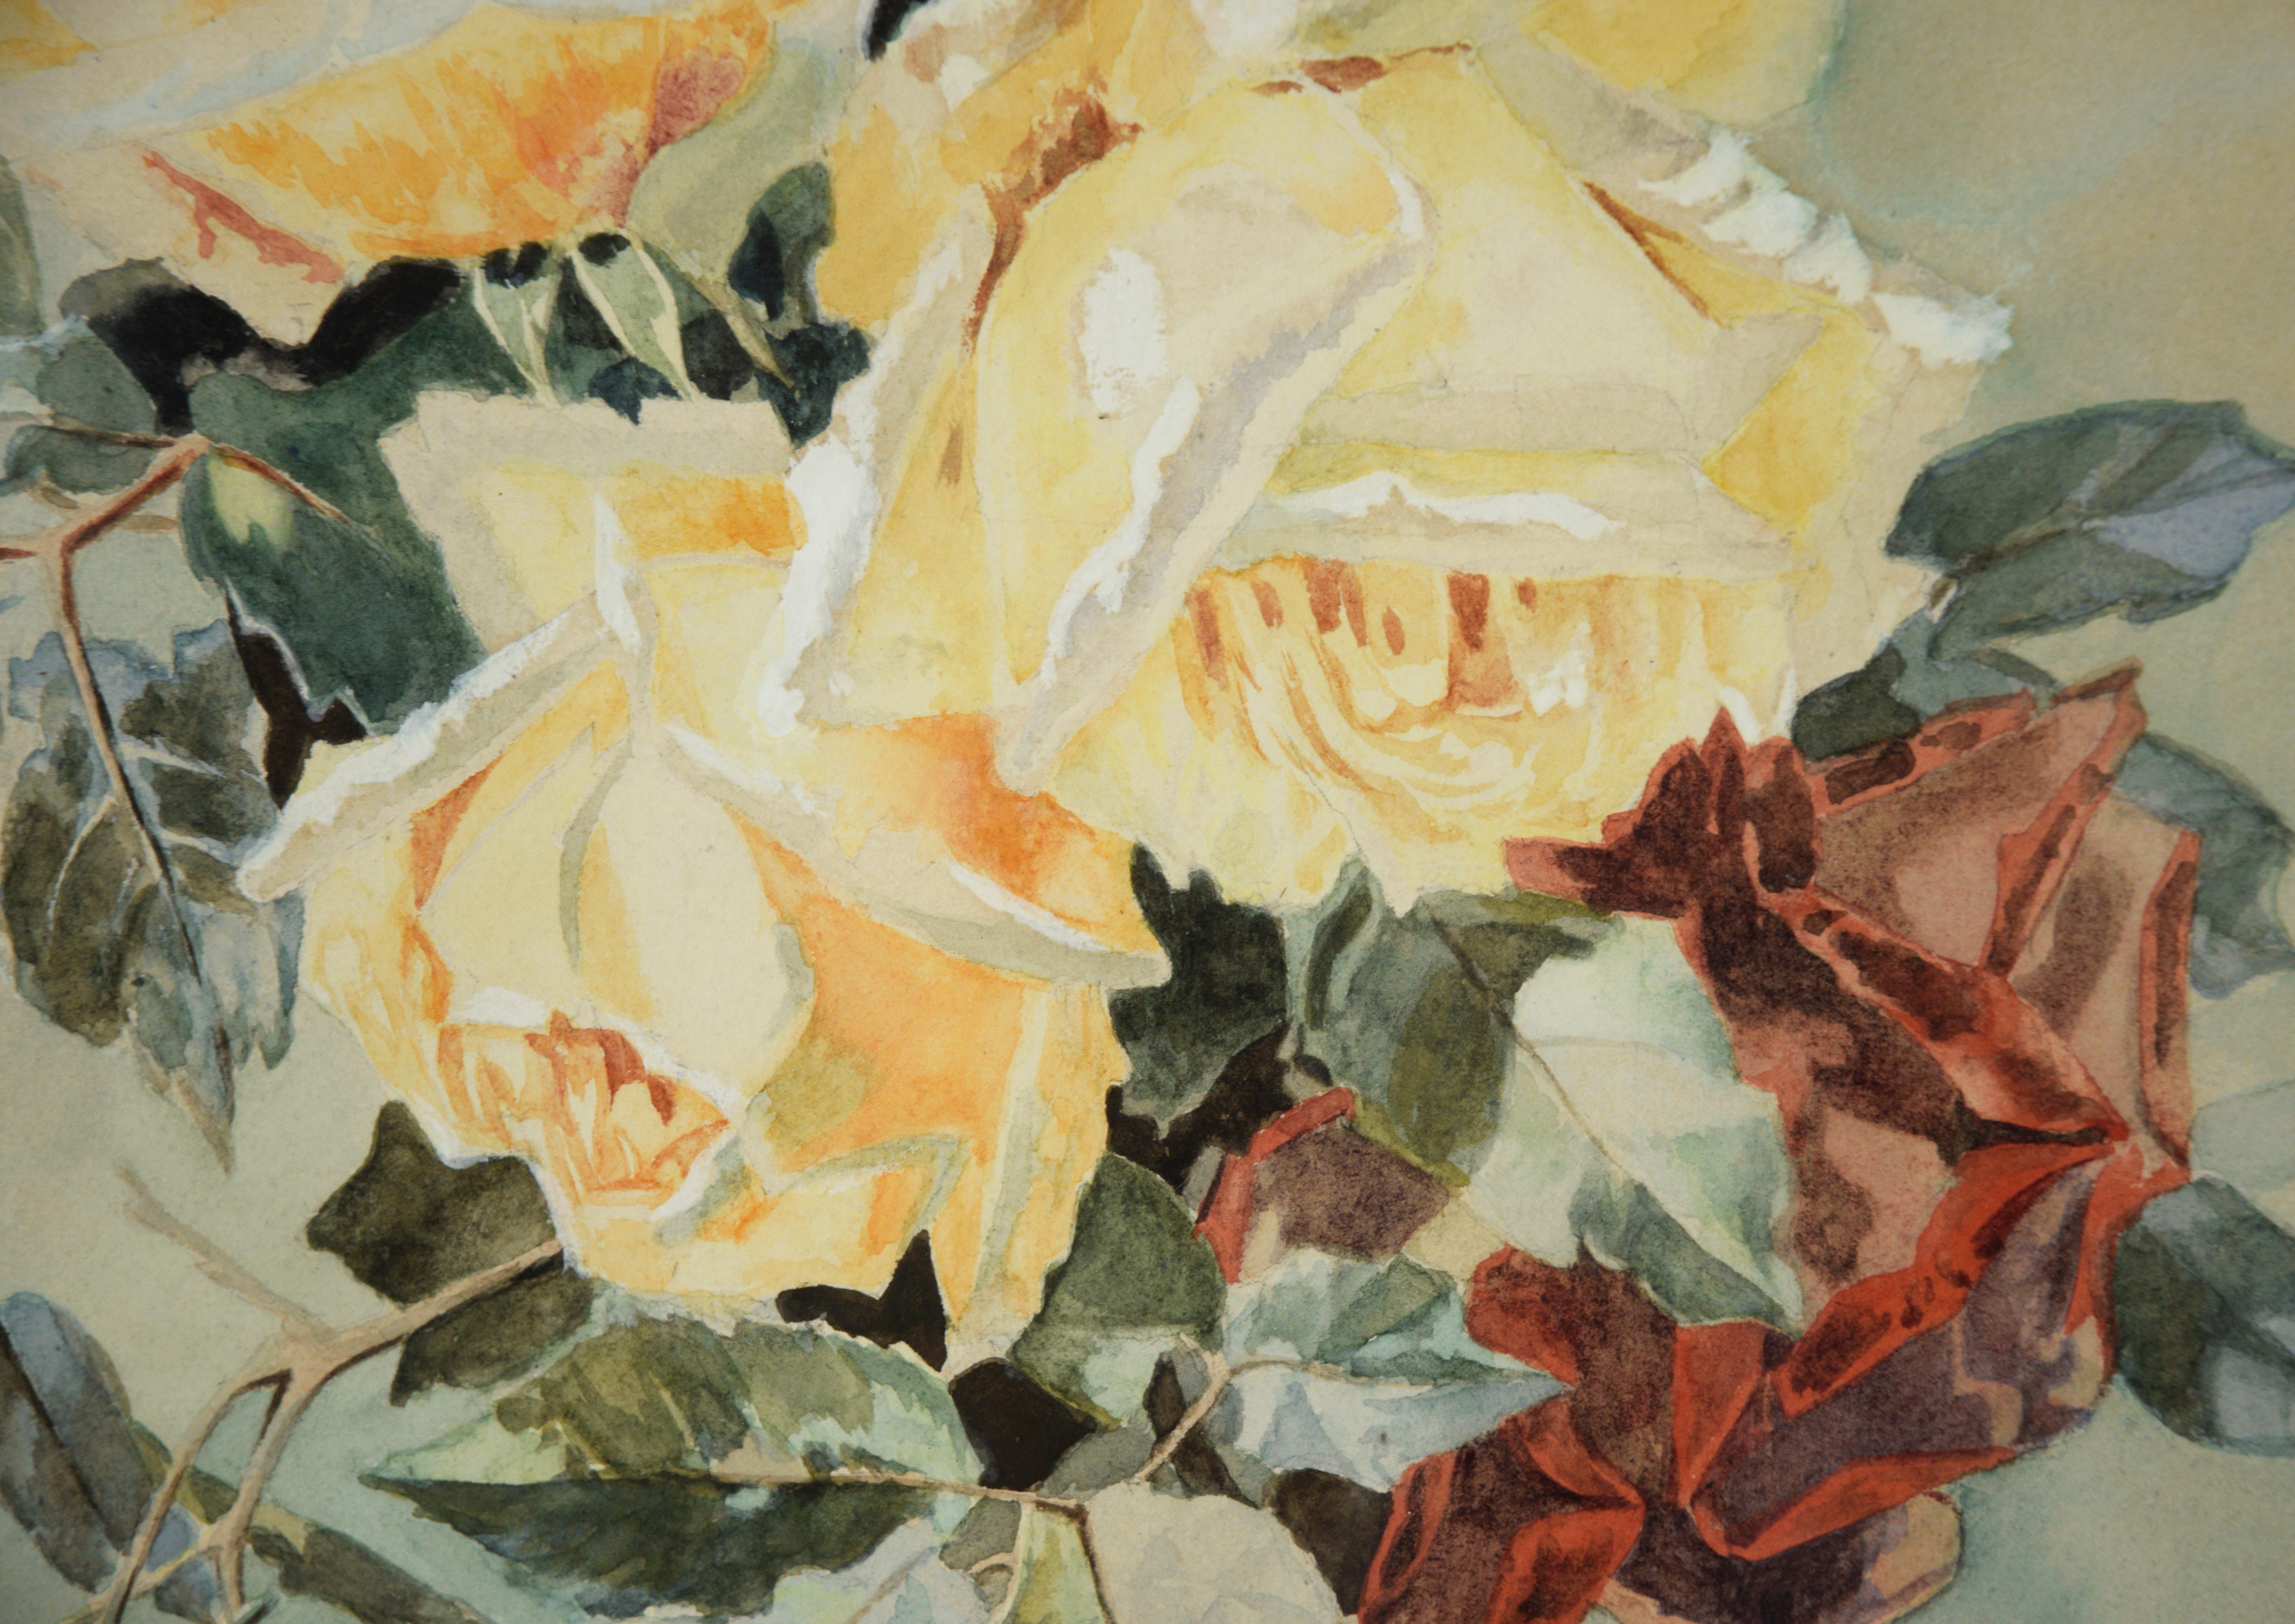 Yellow Rose Bouquet Still Life - Watercolor on Paper - American Impressionist Painting by E.C. Michelle